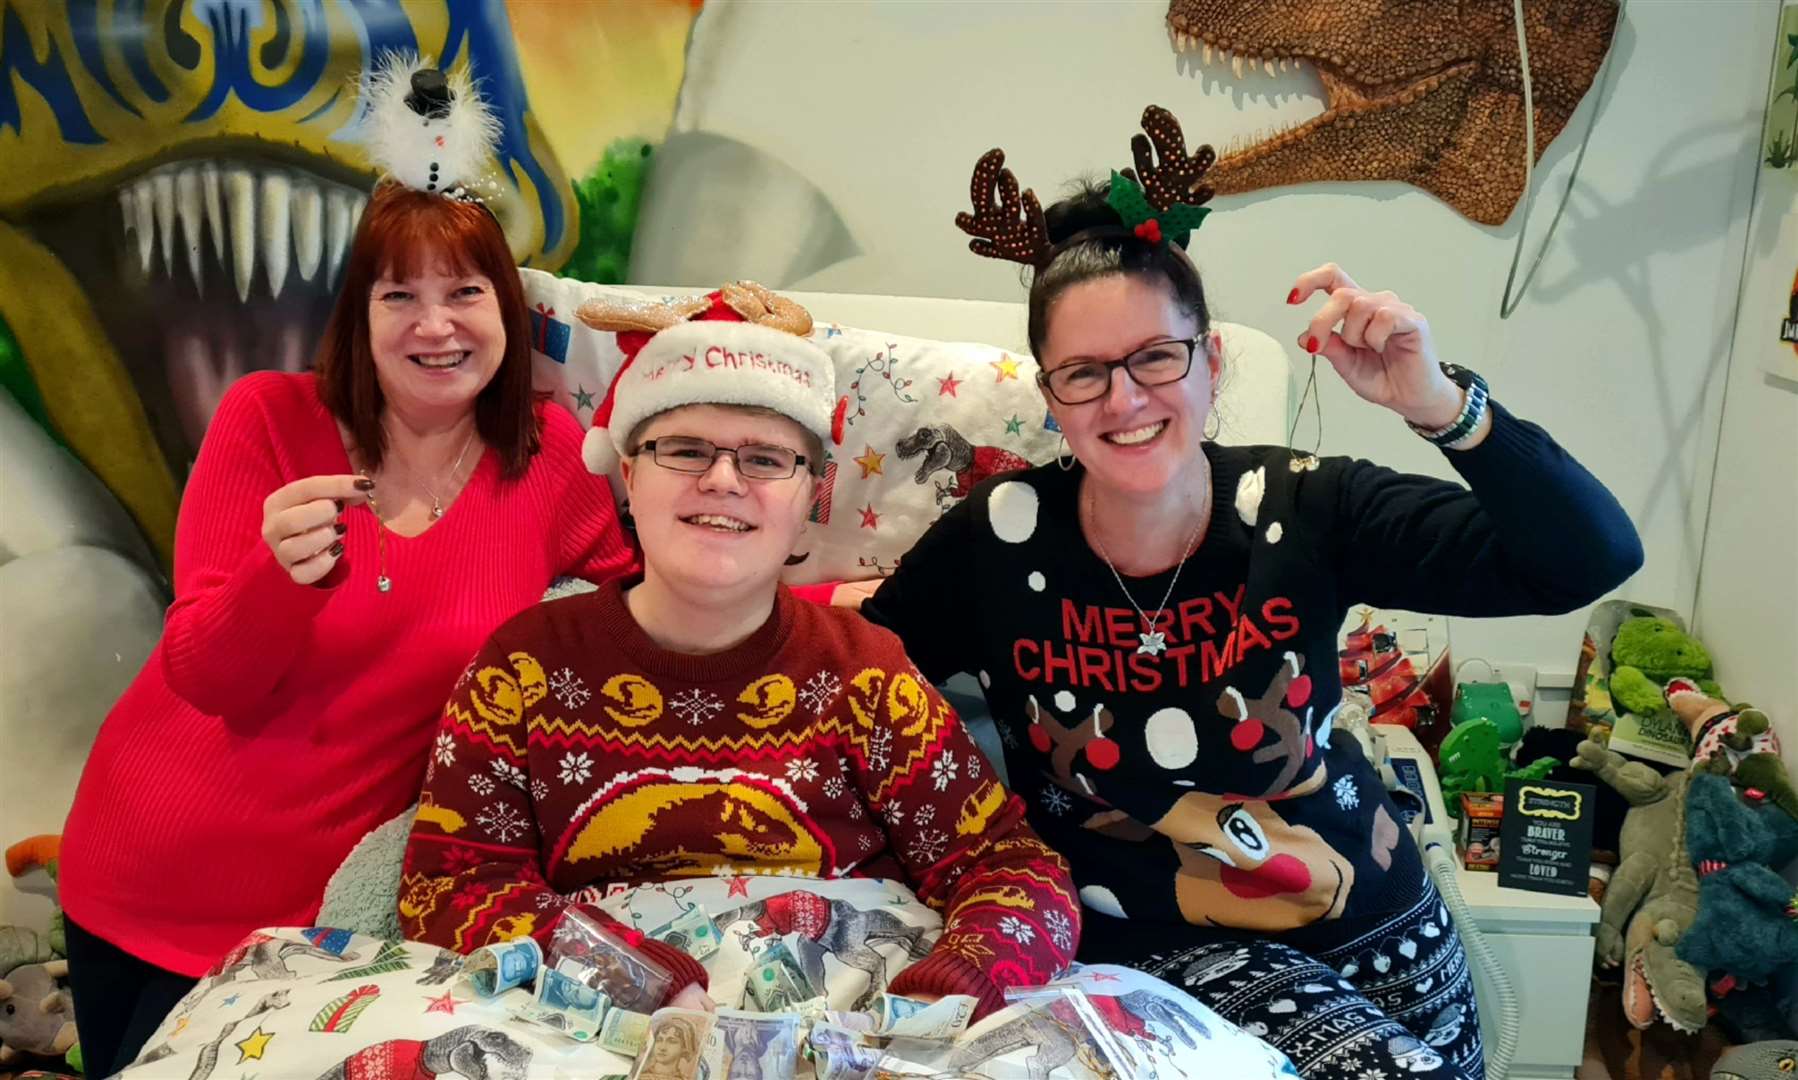 Lisa Edmonds and Denise Parris with Lisa's son Cameron and the jingle bells she's made for ellenor